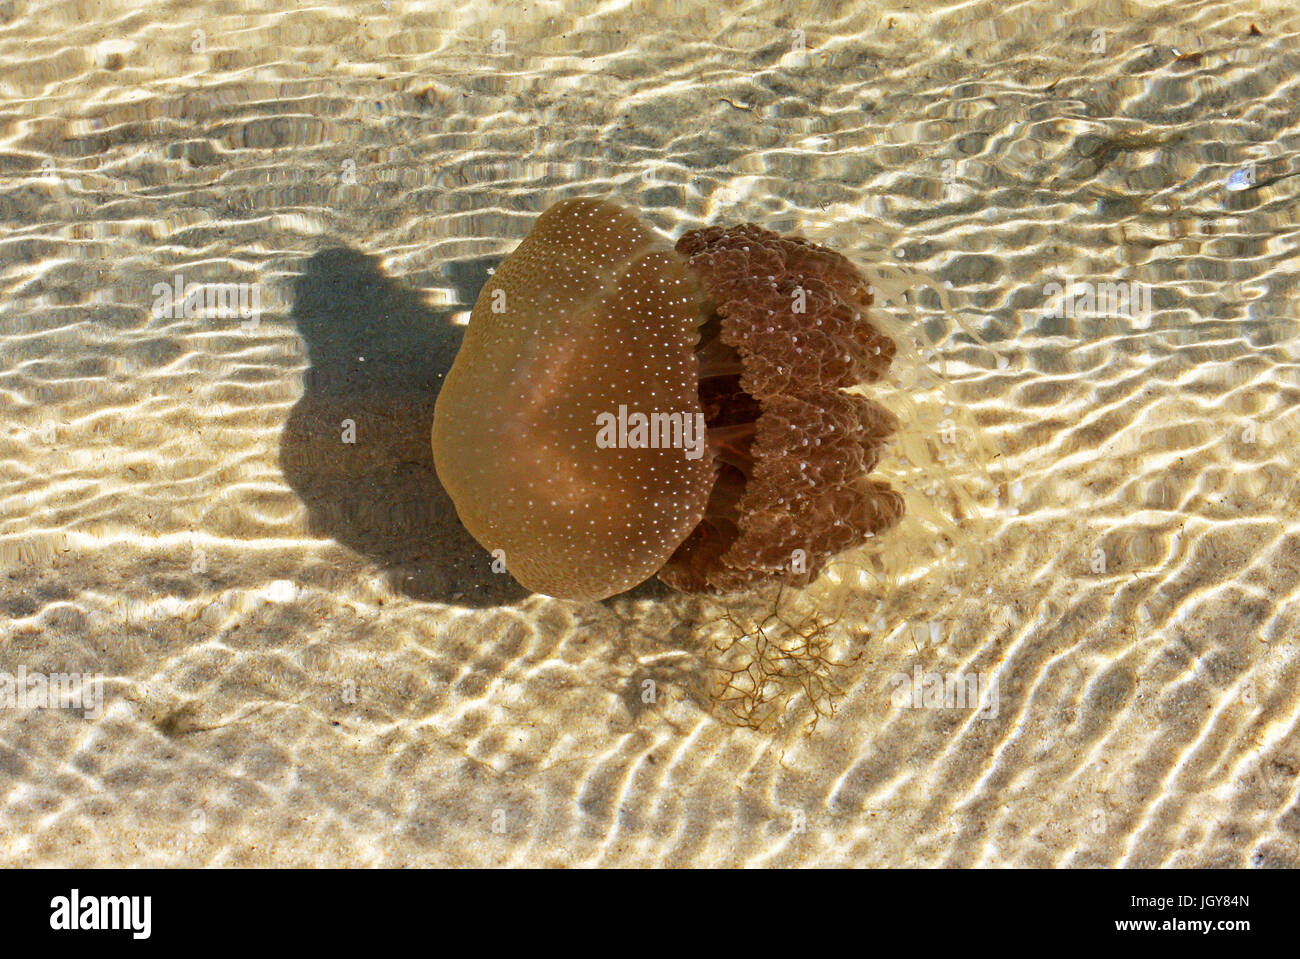 An Australian Spotted Jellyfish (Phyllorhiza punctata) in the shallow waters of Swan River near Perth in Western Australia Stock Photo